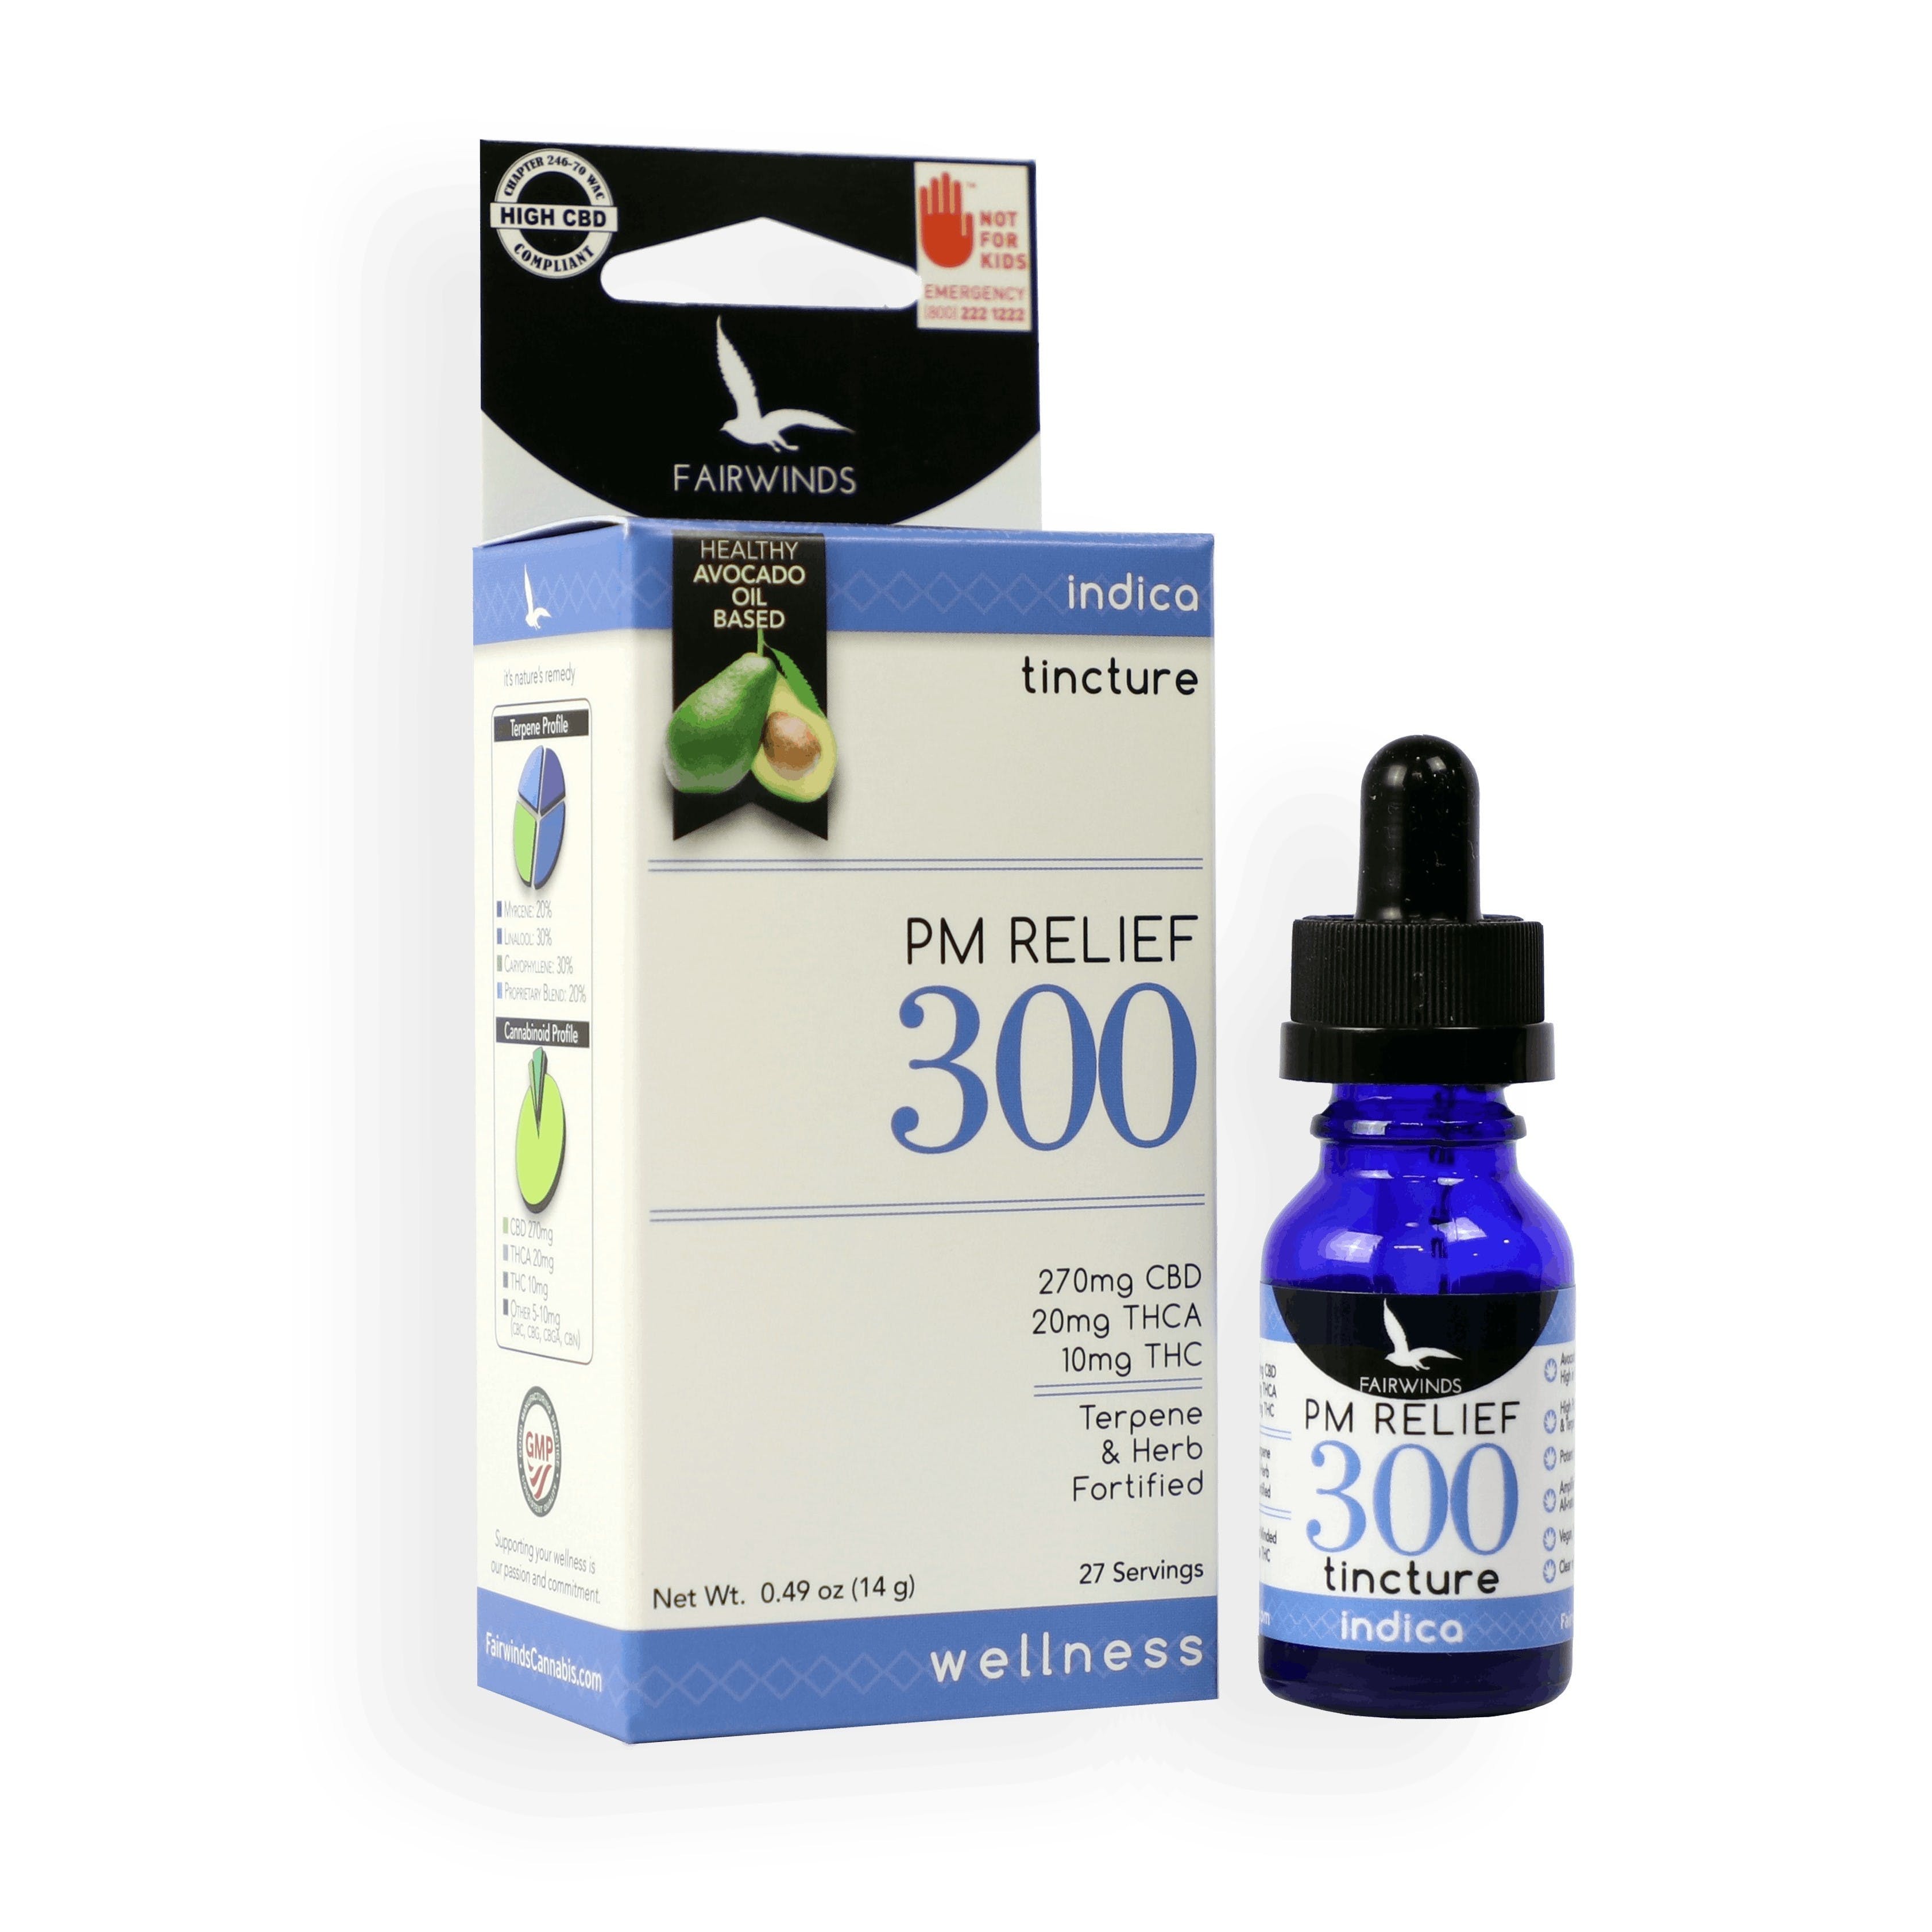 drink-fairwinds-manufacturing-pm-relief-300-tincture